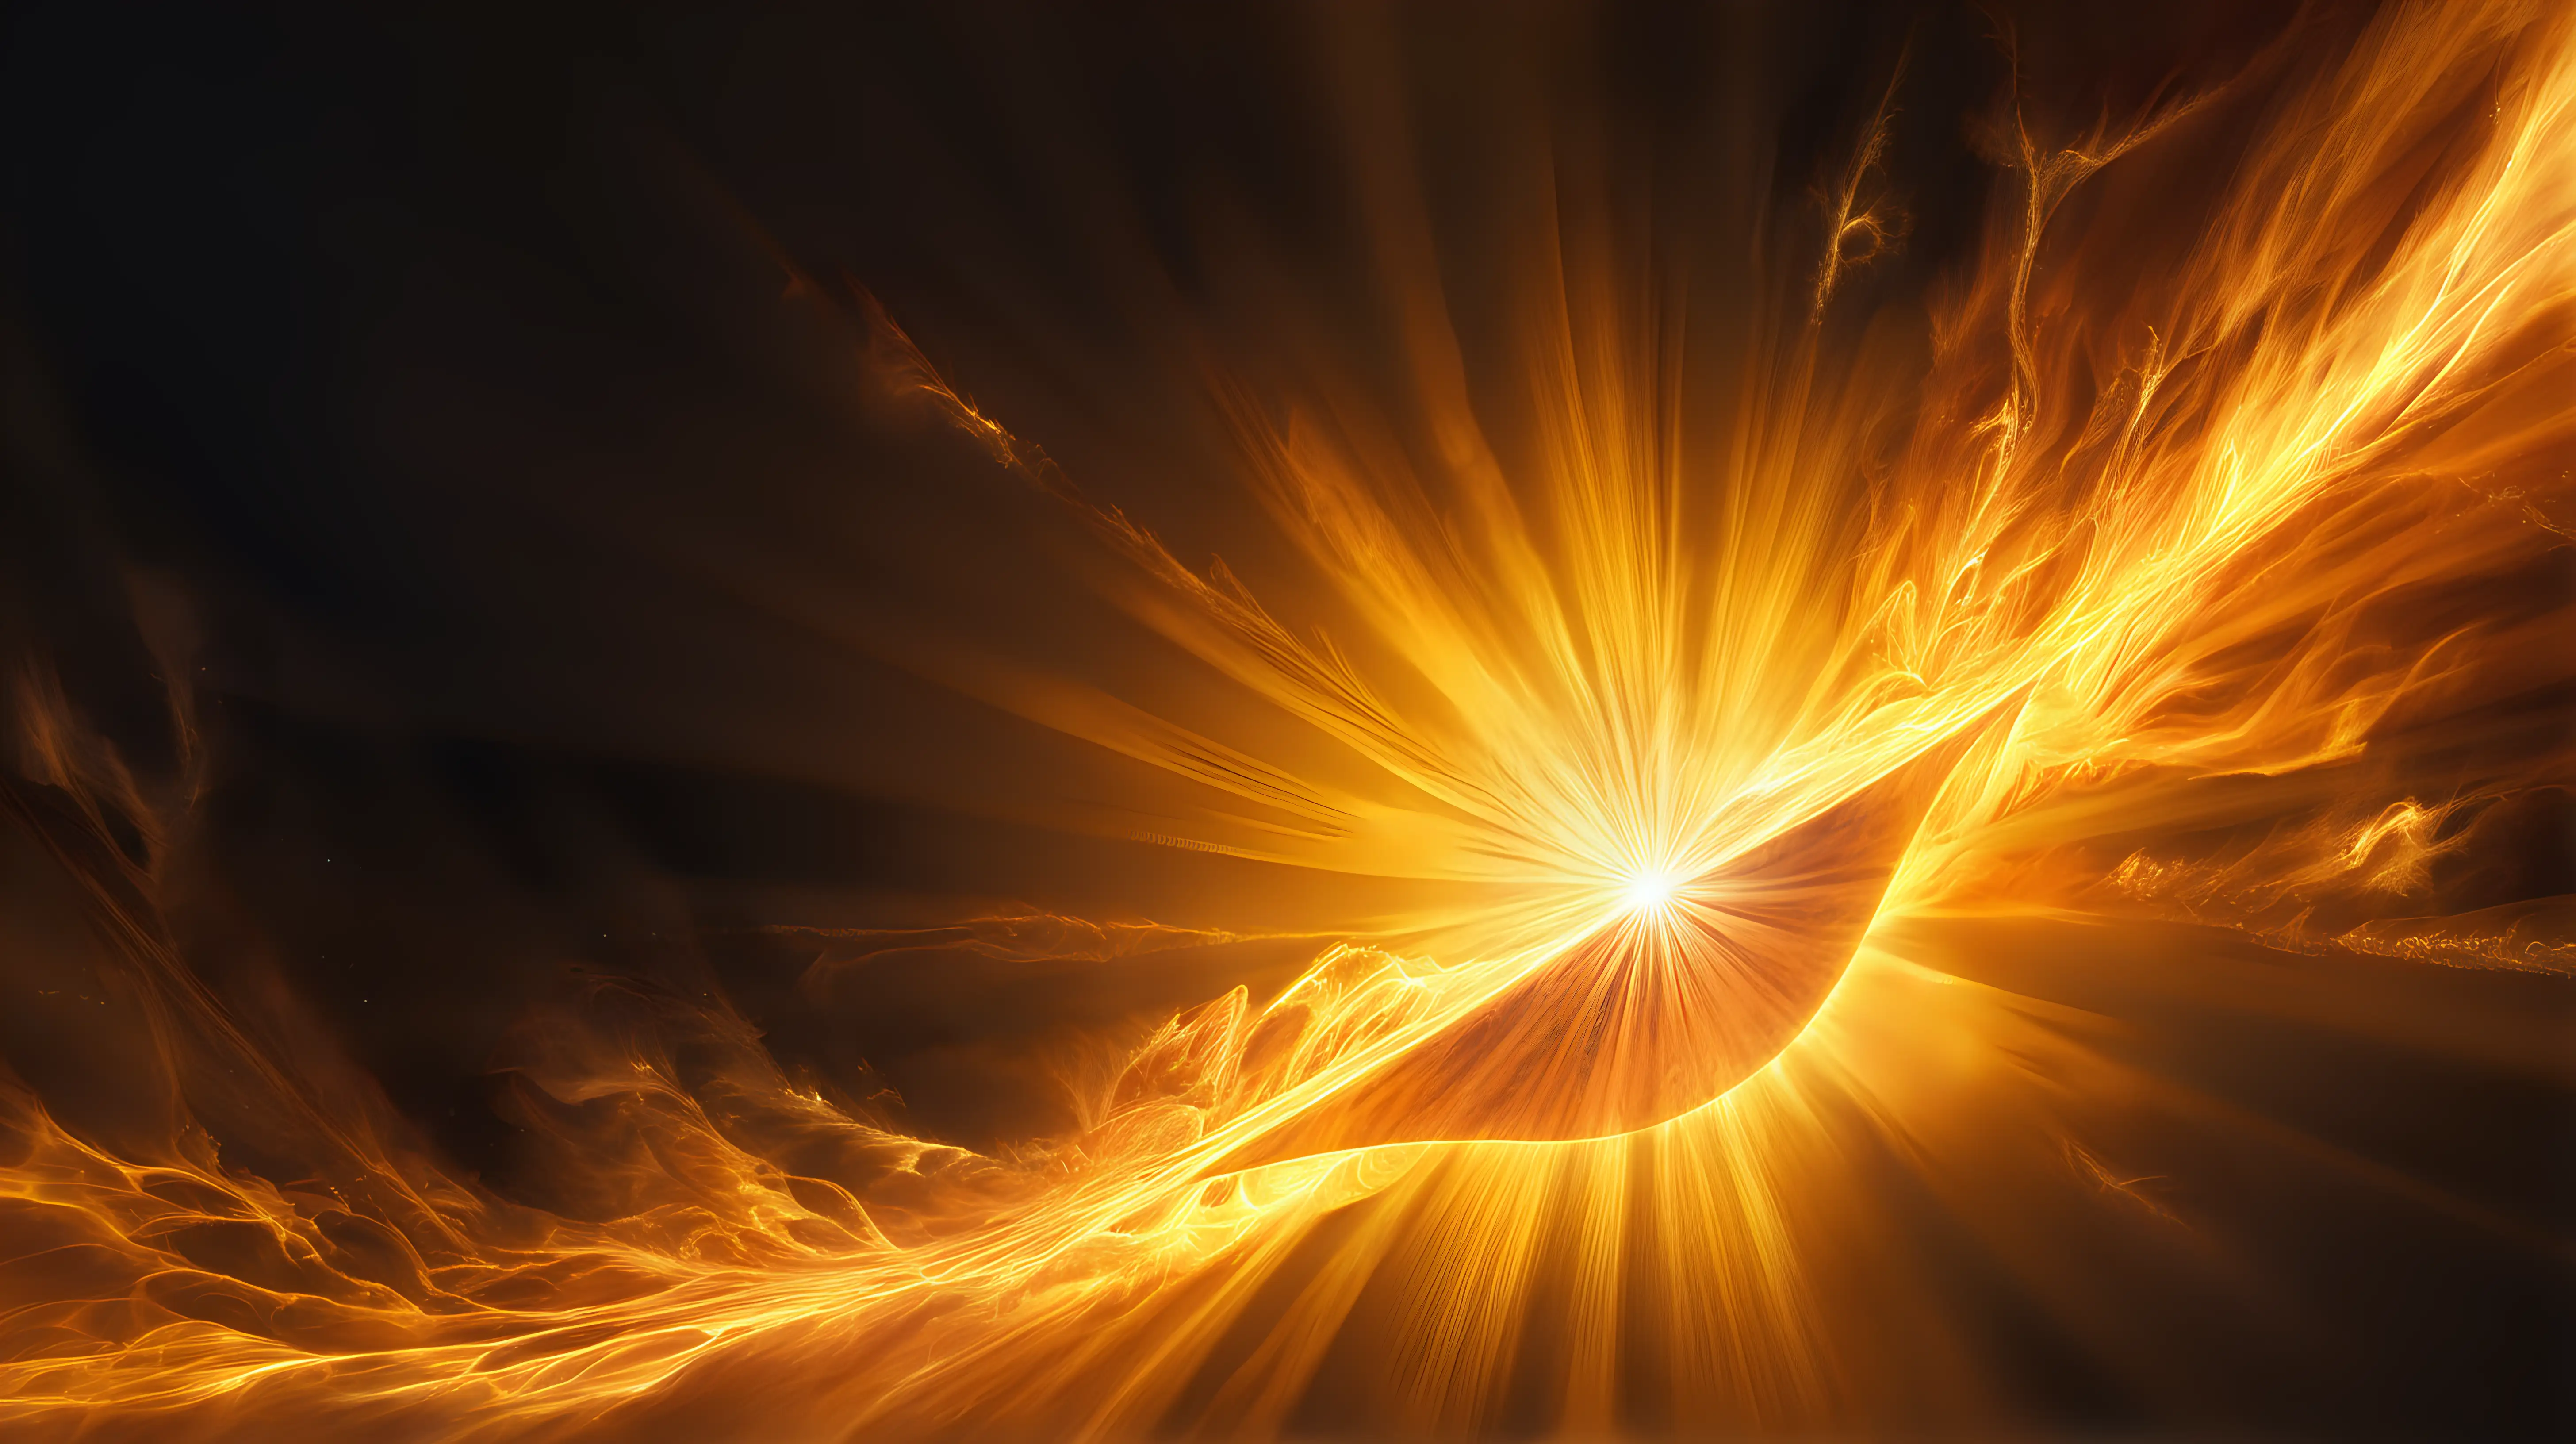 Bursting rays of warm yellows and oranges against a dark backdrop, mimicking the vibrant energy of a solar flare.